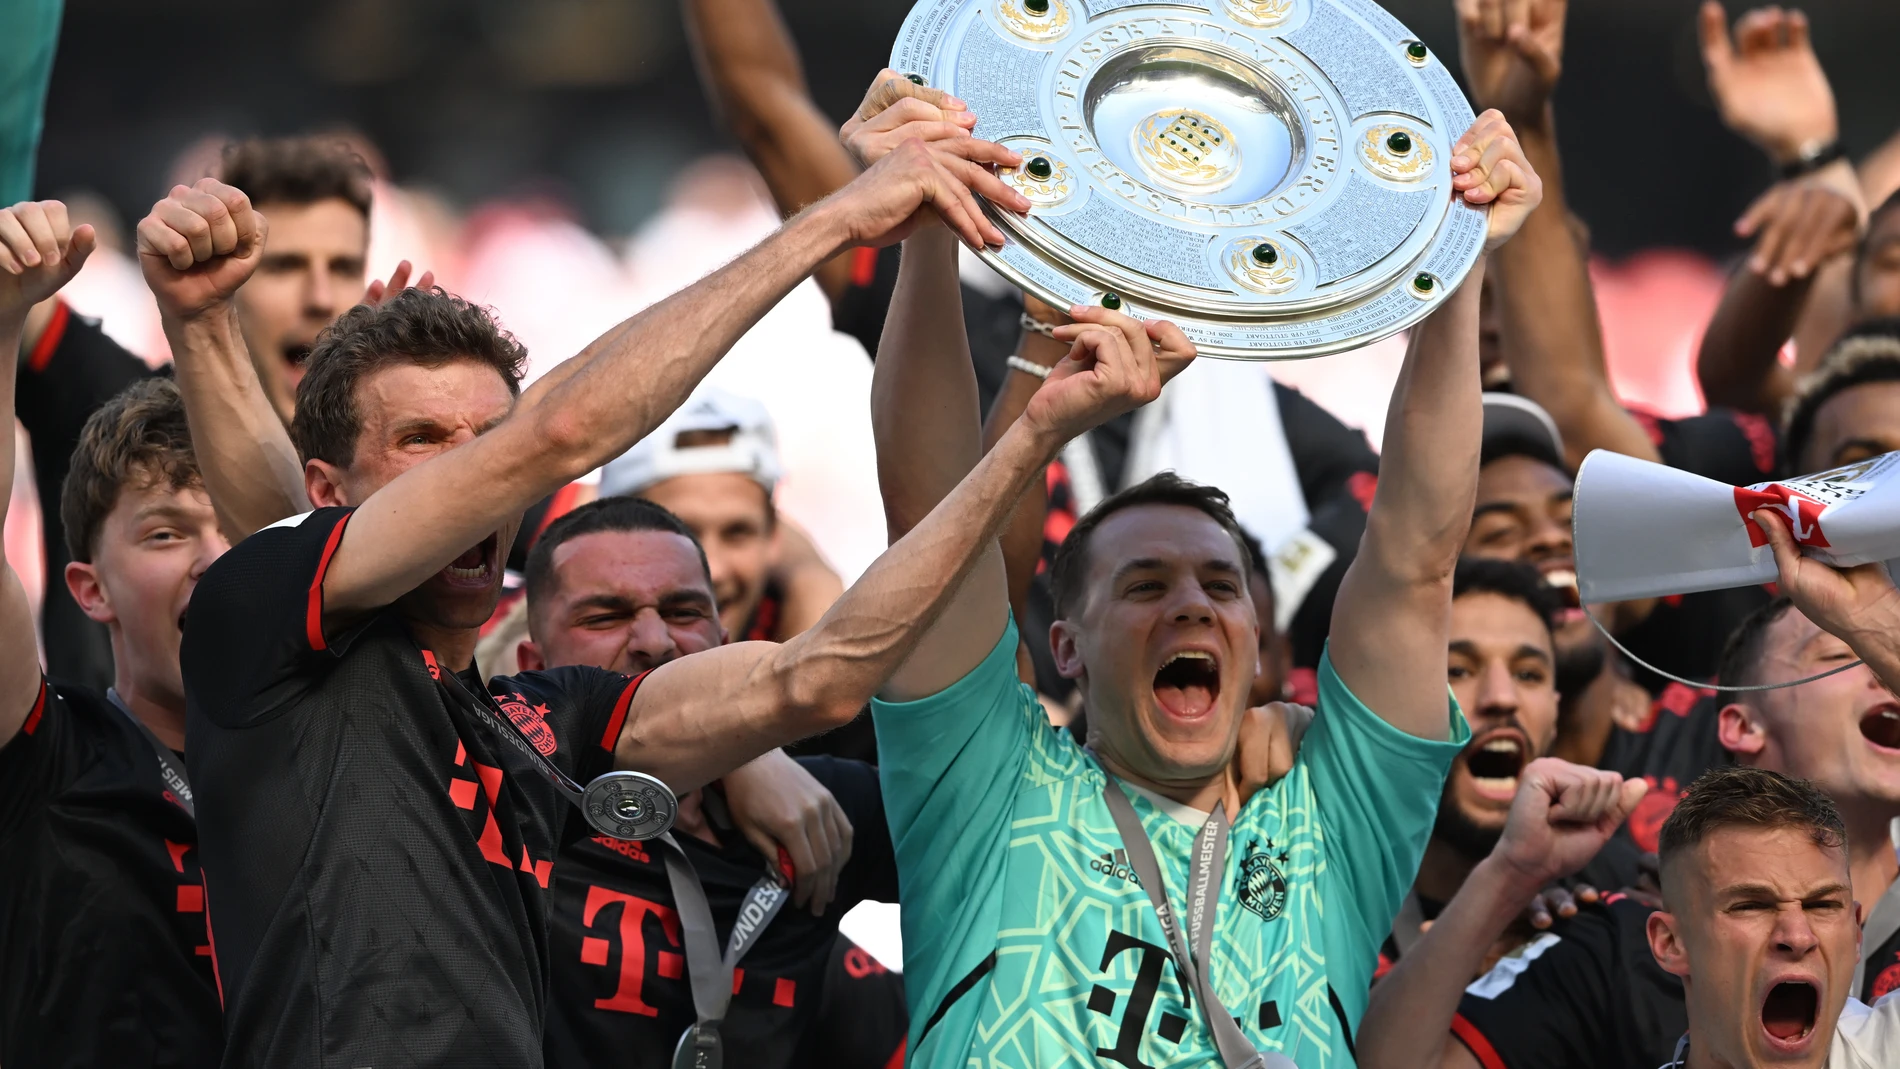 Cologne (Germany), 27/05/2023.- Thomas Mueller (L) and Manuel Neuer (R) of Munich lift the league title trophy after winning the German Bundesliga soccer match between 1.FC Cologne and FC Bayern Munich, in Cologne, Germany, 27 May 2023. Both Bayern Munich and Borussia Dortmund finished the season on 71 points but Bayern won the title due to a better goal difference. (Alemania, Rusia, Colonia) EFE/EPA/FILIP SINGER CONDITIONS - ATTENTION: The DFL regulations prohibit any use of photographs as image sequences and/or quasi-video. 